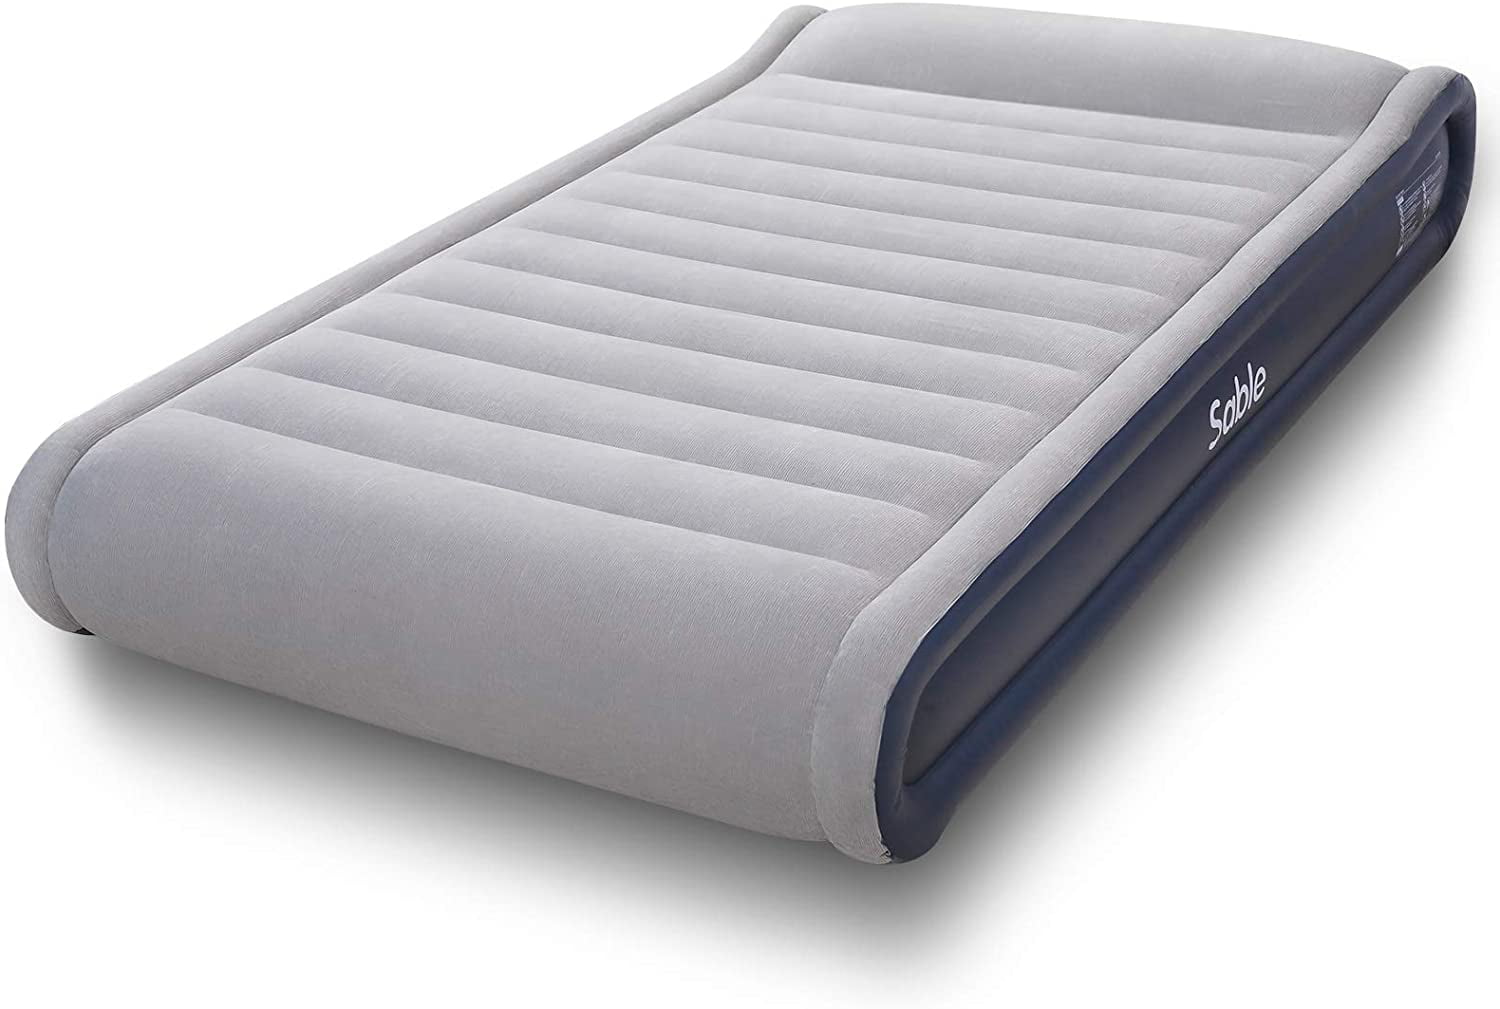 203 x 152 x 48 cm Sable Inflatable Air Bed Double Size Air Mattress with Built-in Electric Pump and Repair Kits